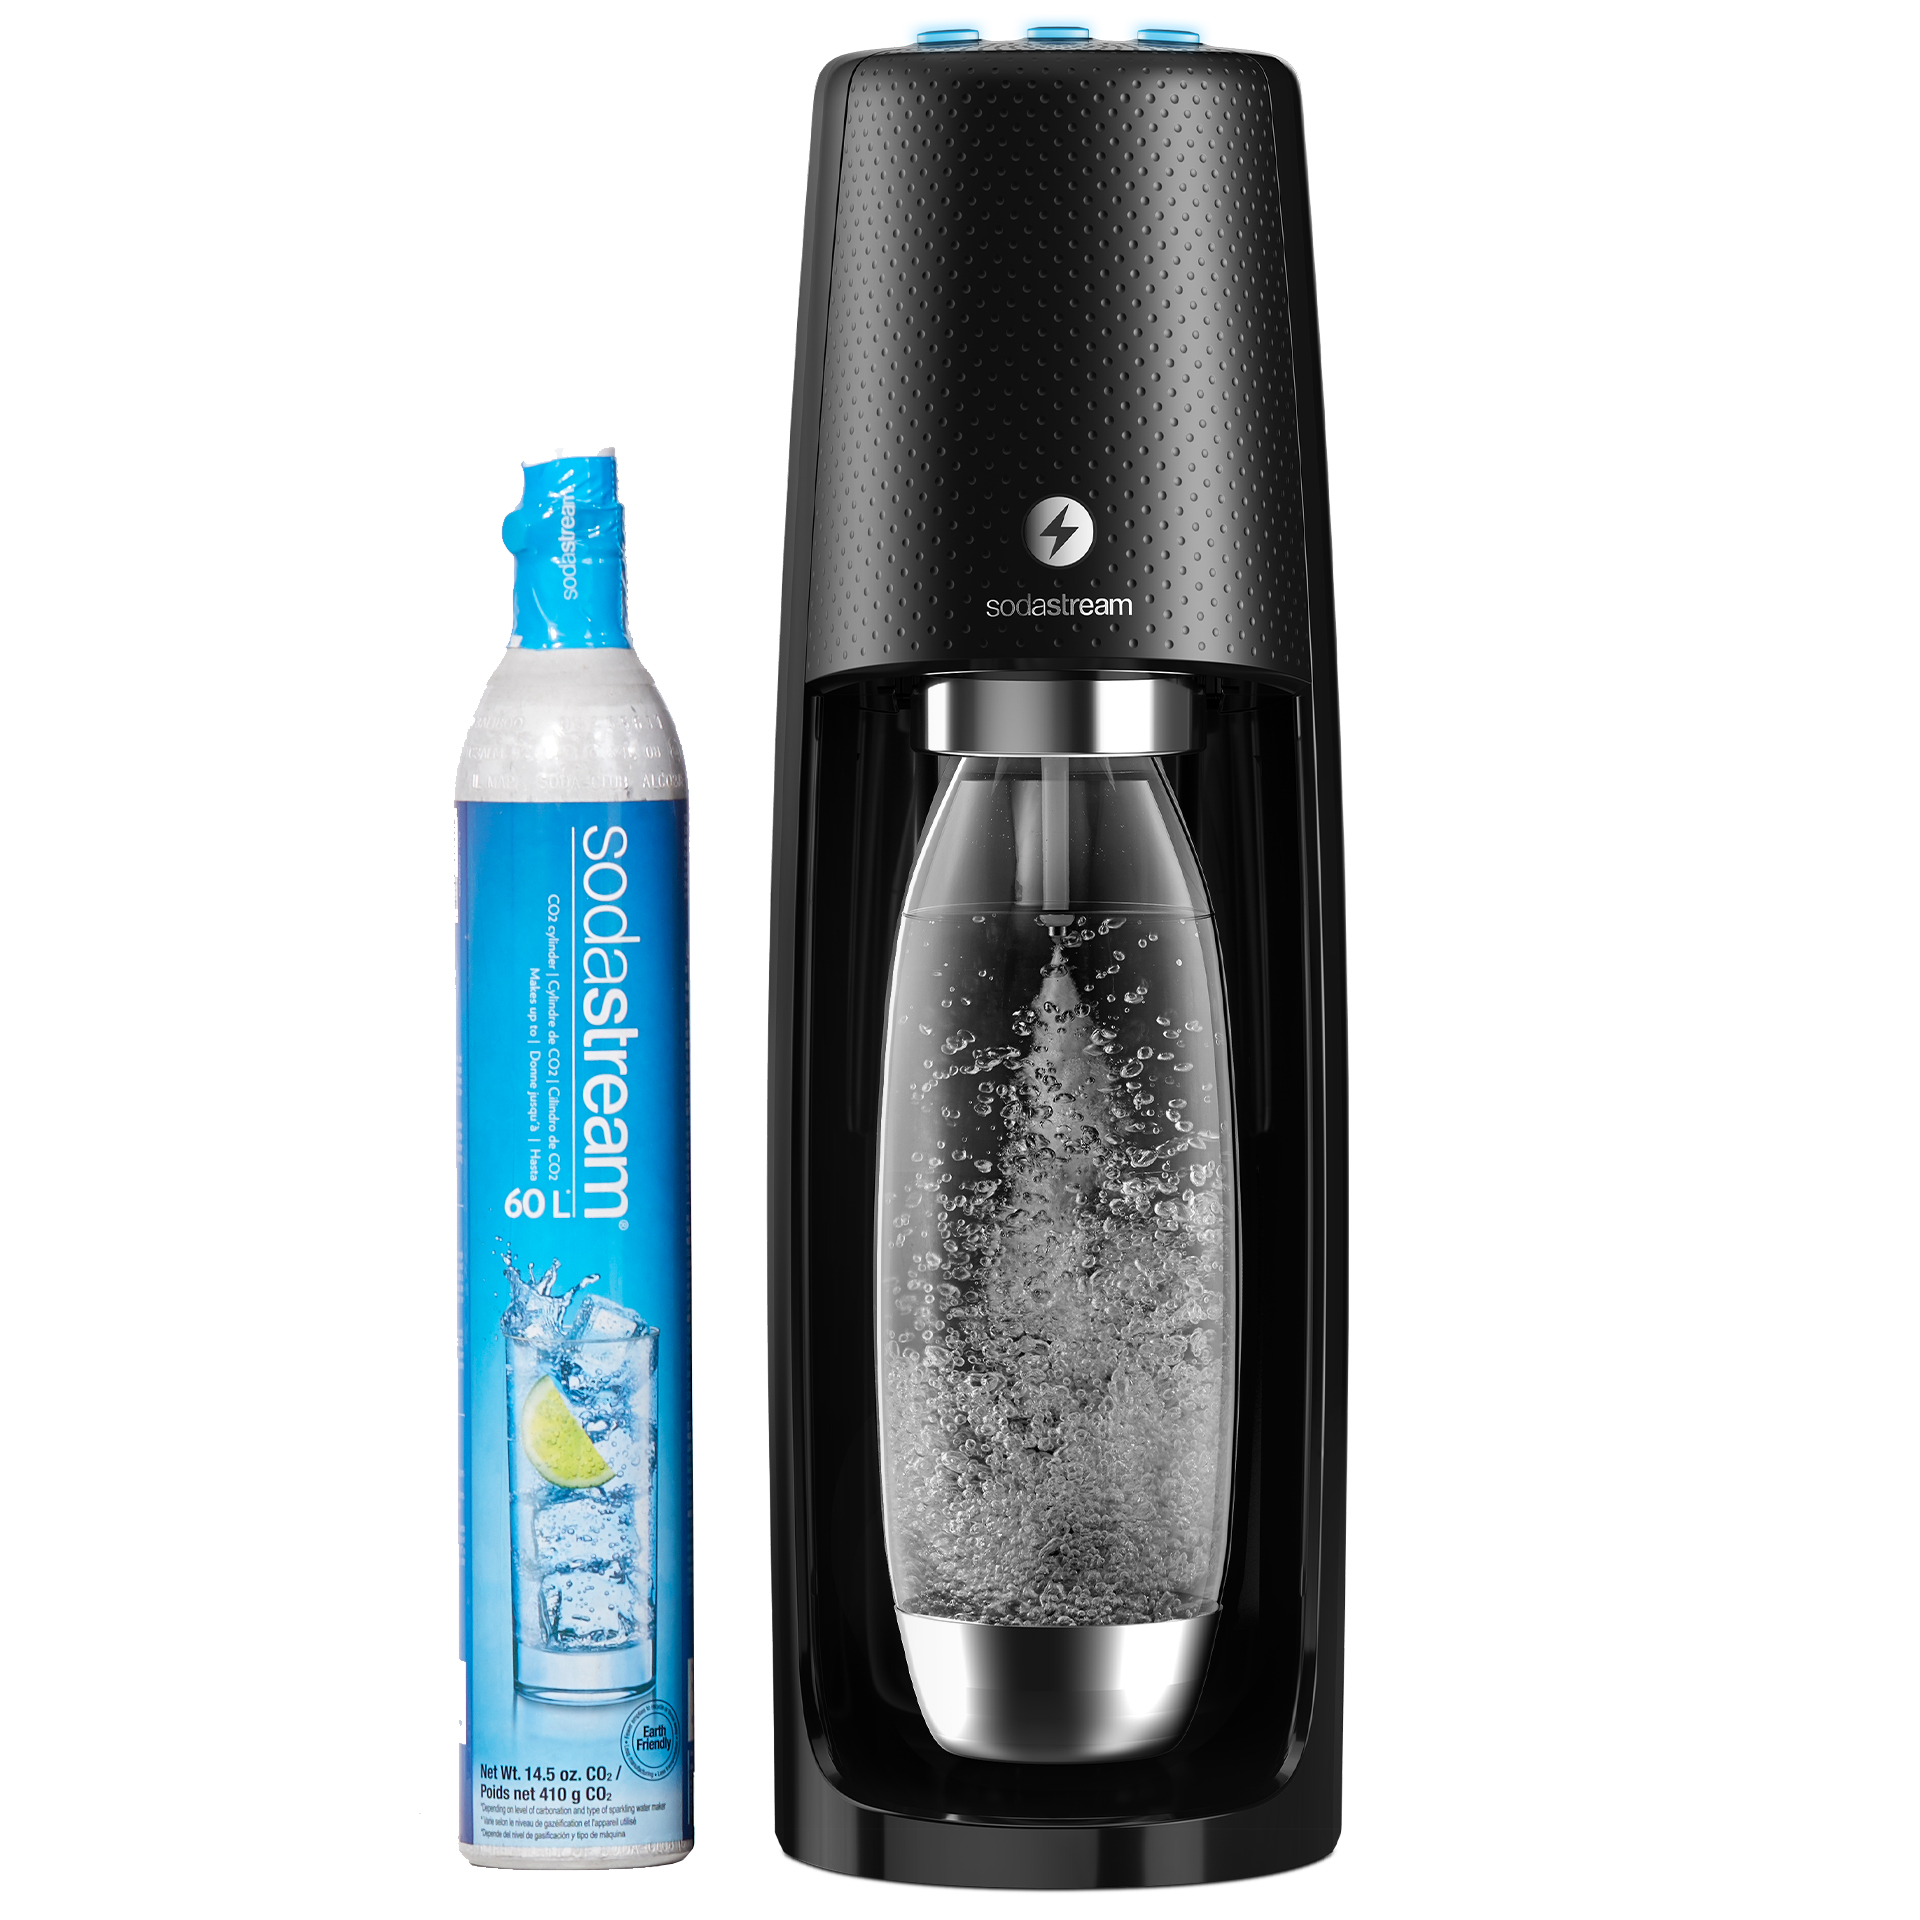 SodaStream One Touch Electric Sparkling Water Maker Kit, Black - image 1 of 10